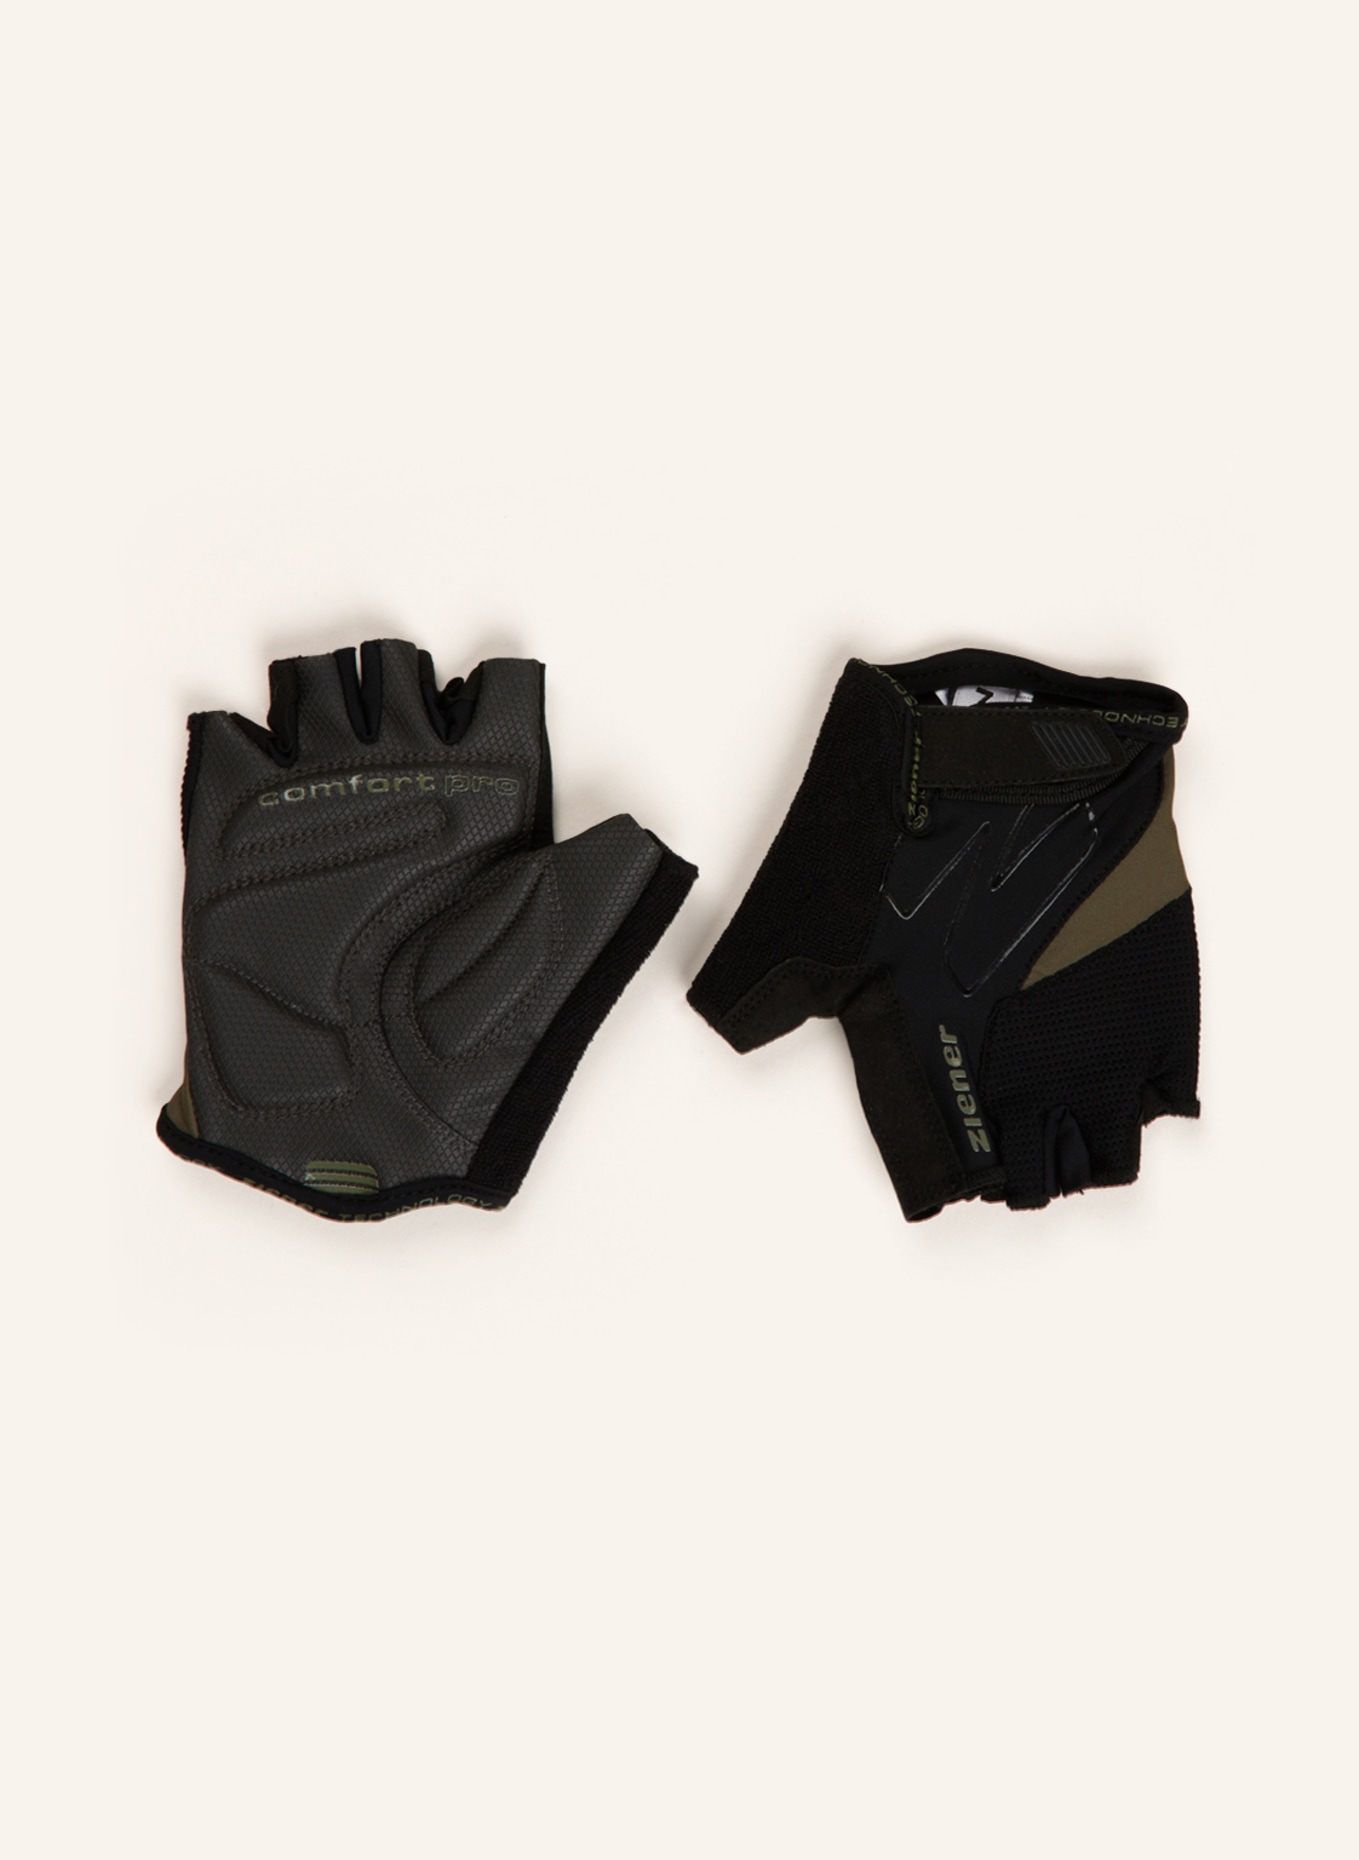 khaki black/ CRAVE ziener Cycling gloves in